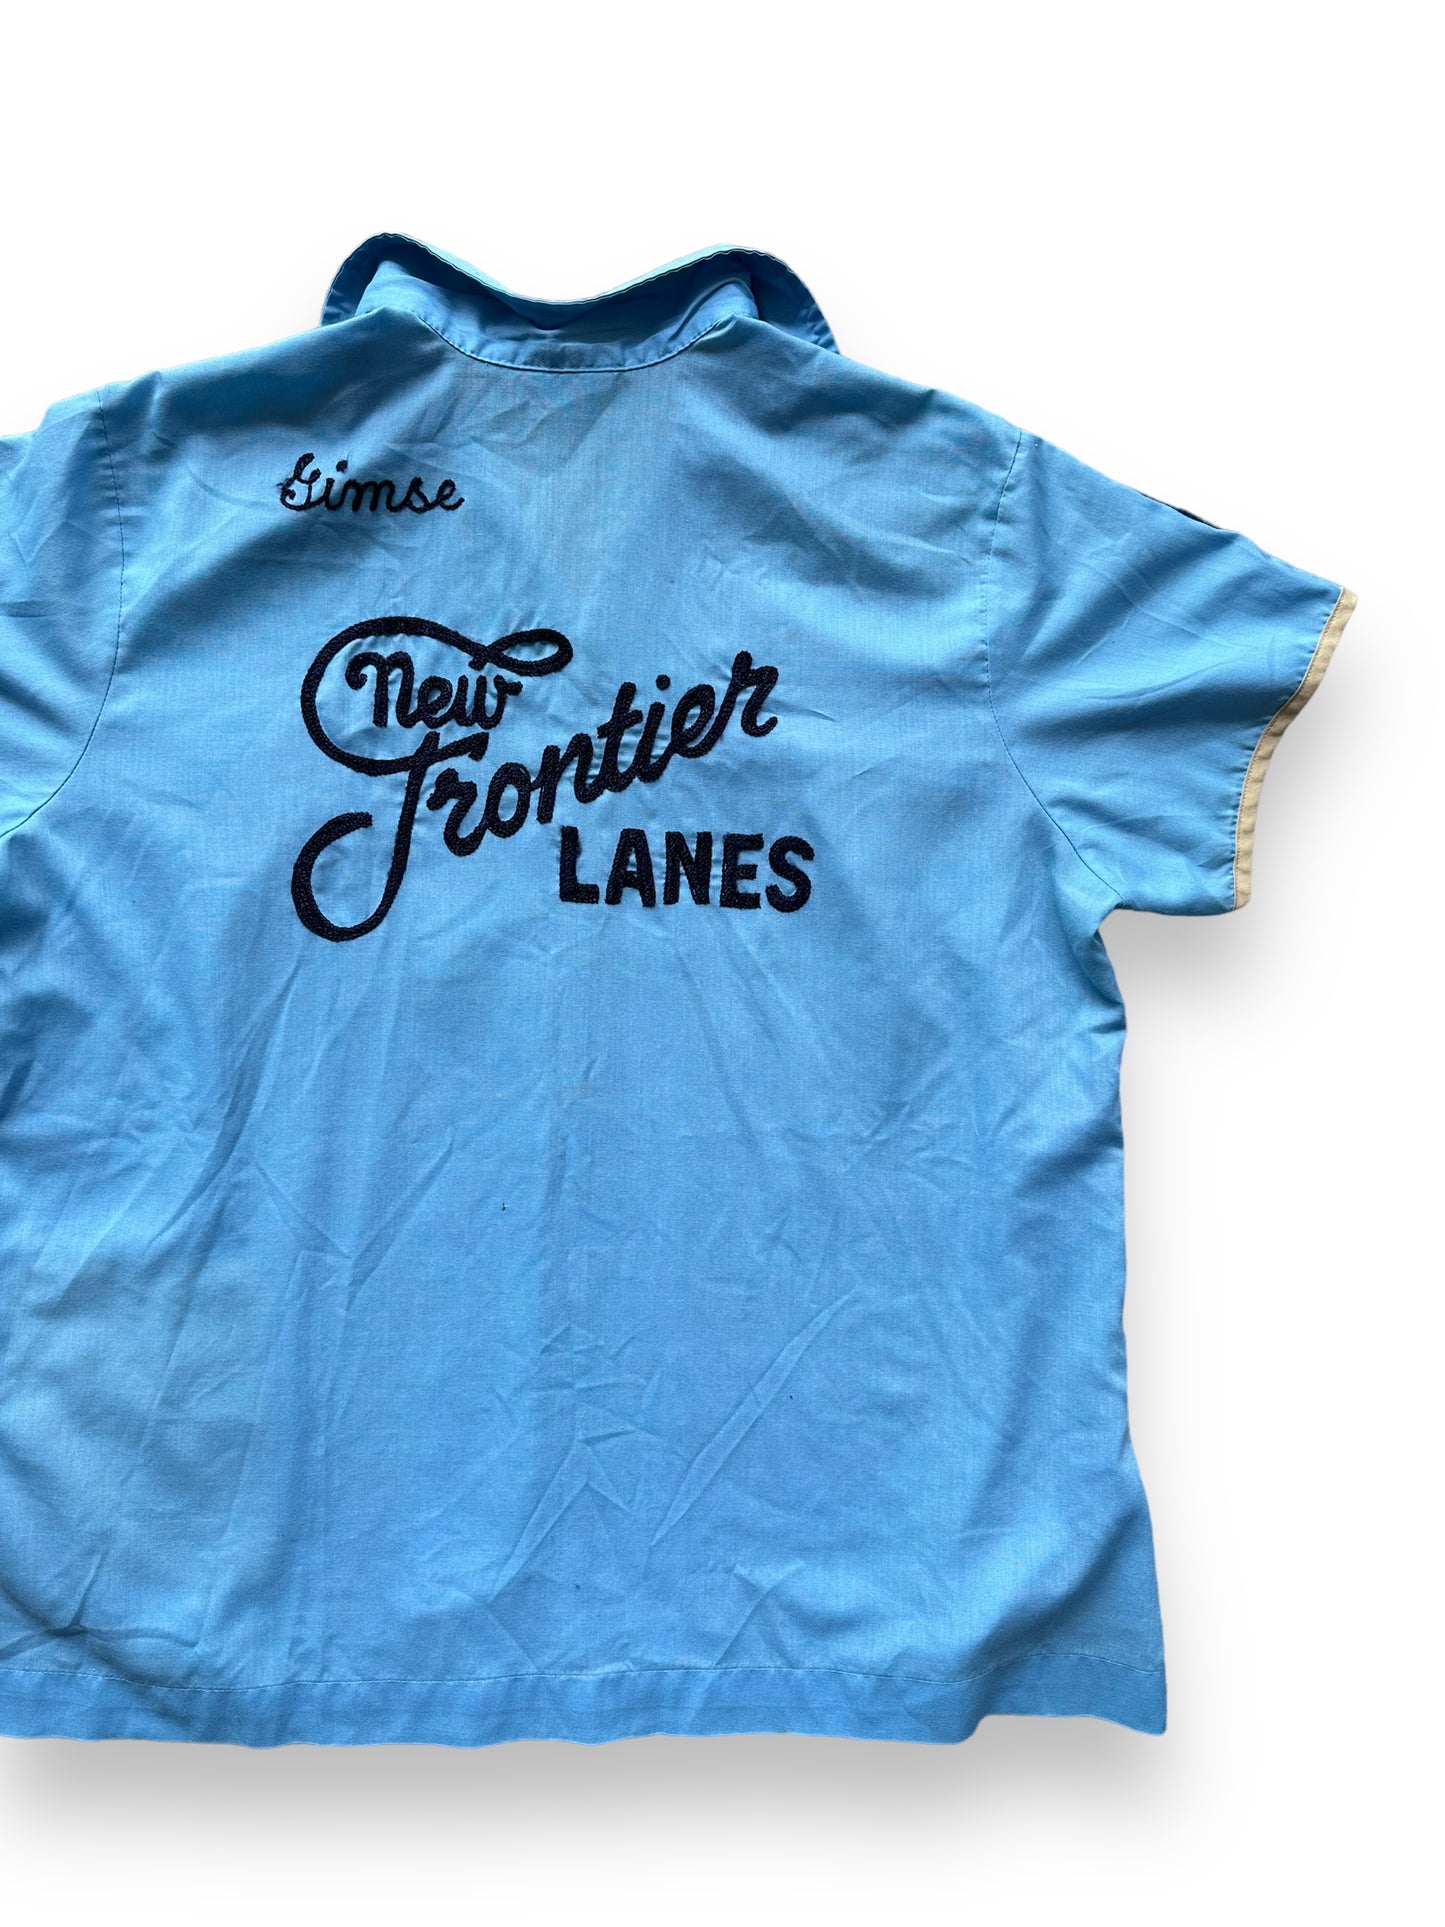 Back right of Vintage "New Frontier Lanes" Chainstitched Bowling Shirt SZ 40 | Vintage Bowling Shirt Seattle | Barn Owl Vintage Seattle